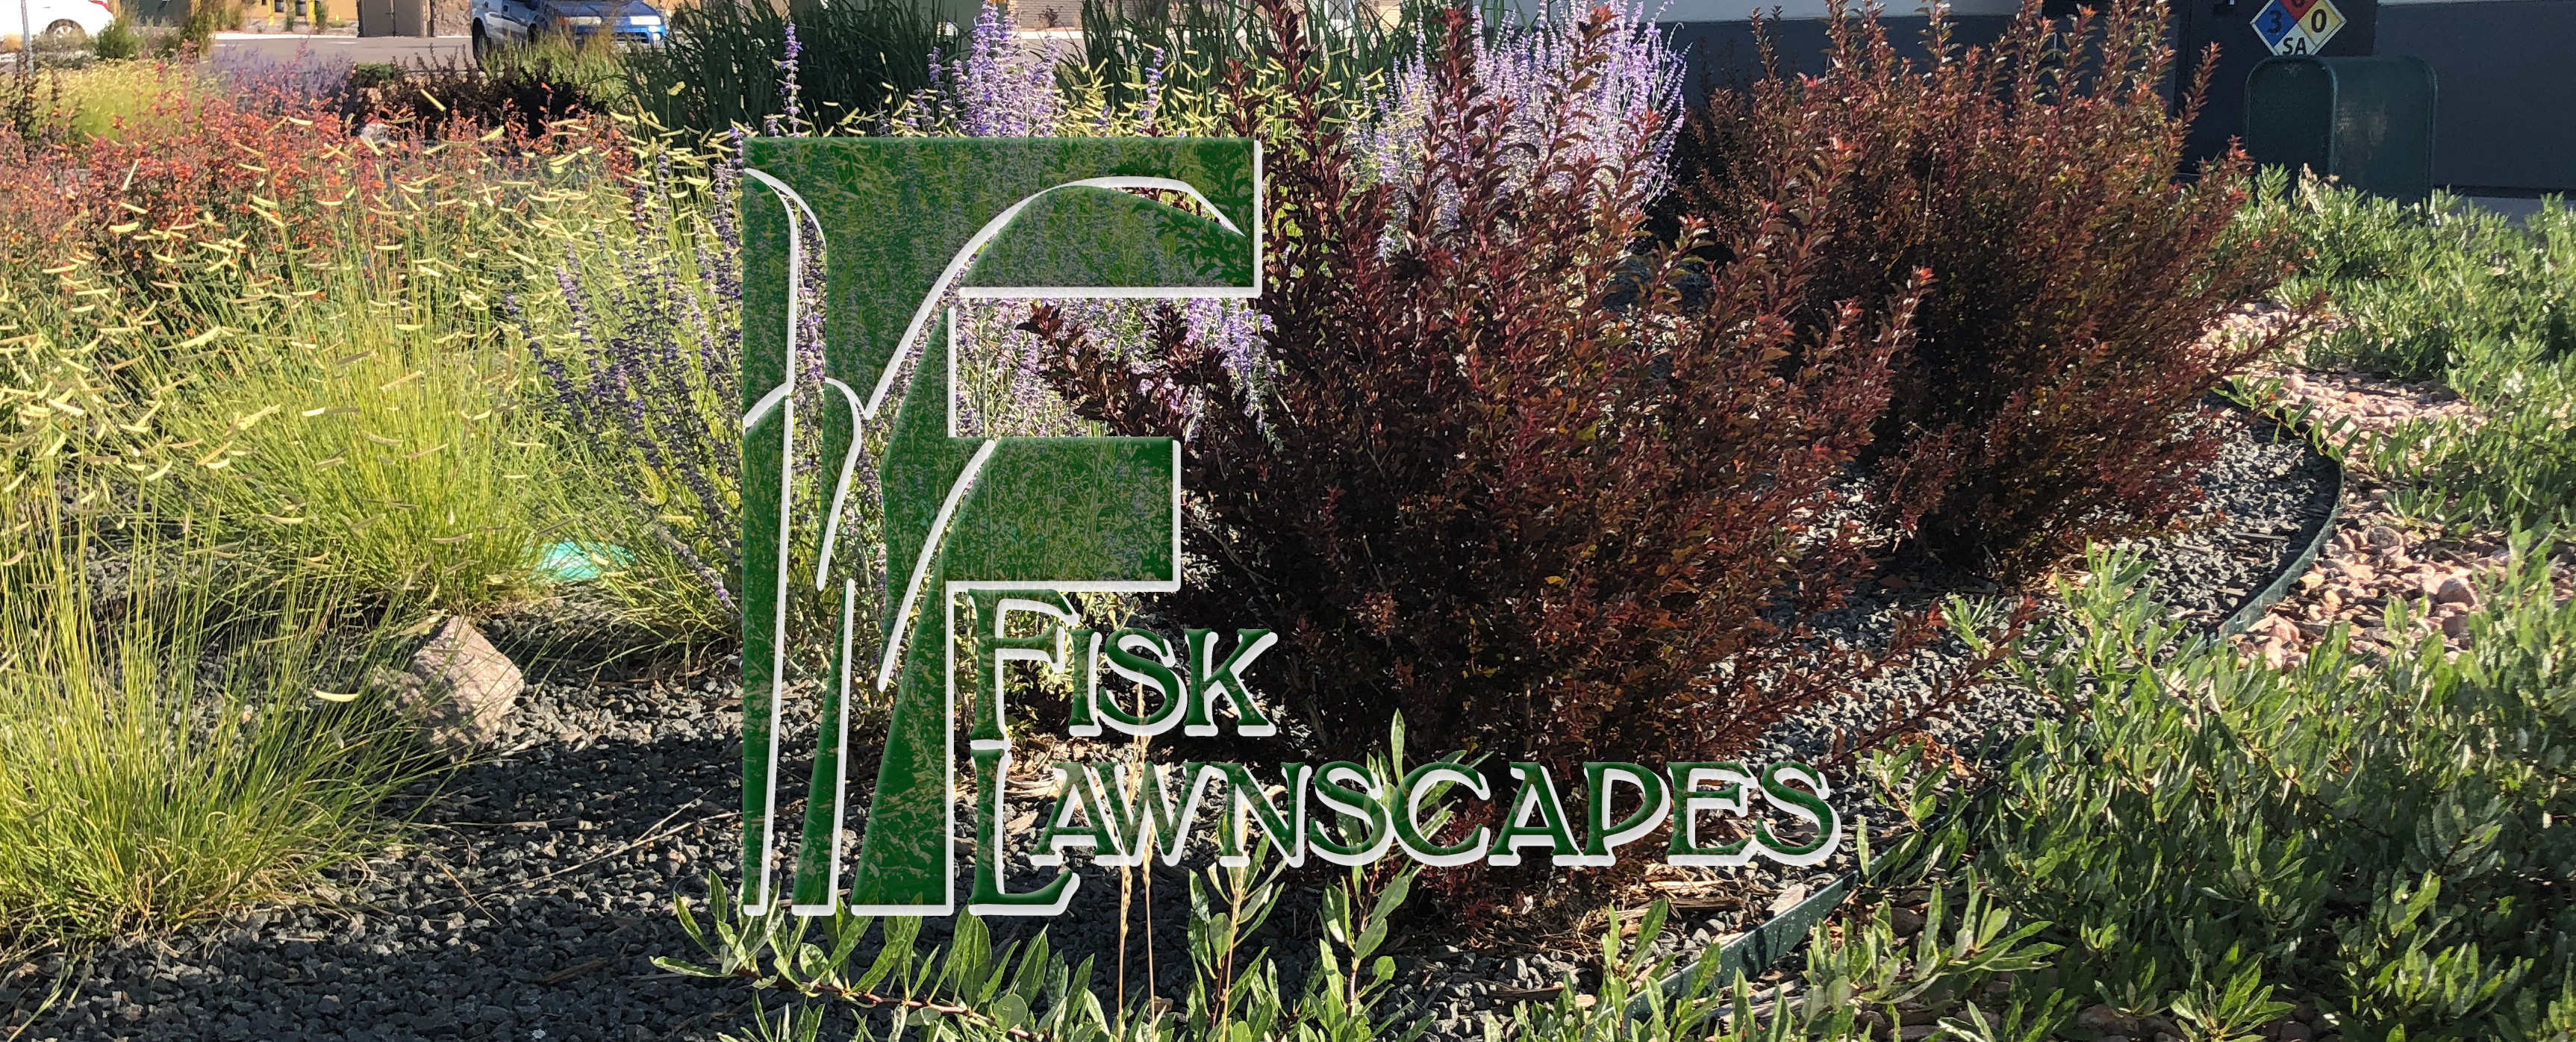 Using Landscape as Defensible Space